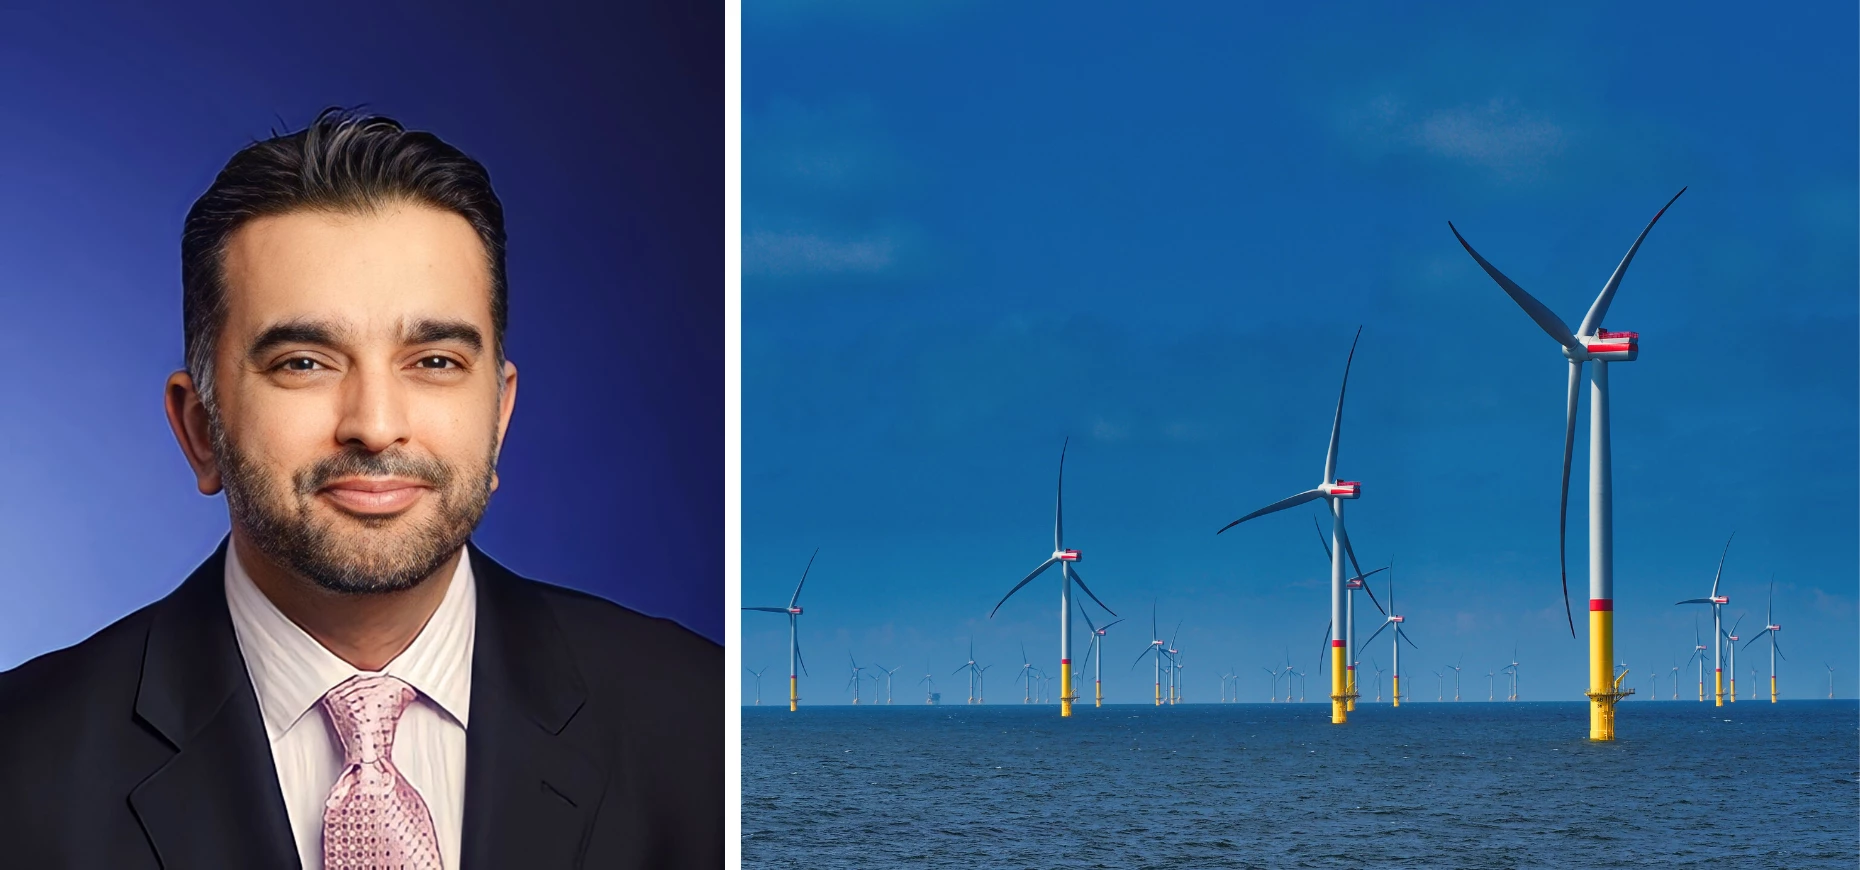 Ahmed Goga, newly appointed director of the Great South West Partnership, pictured alongside an offshore wind farm.